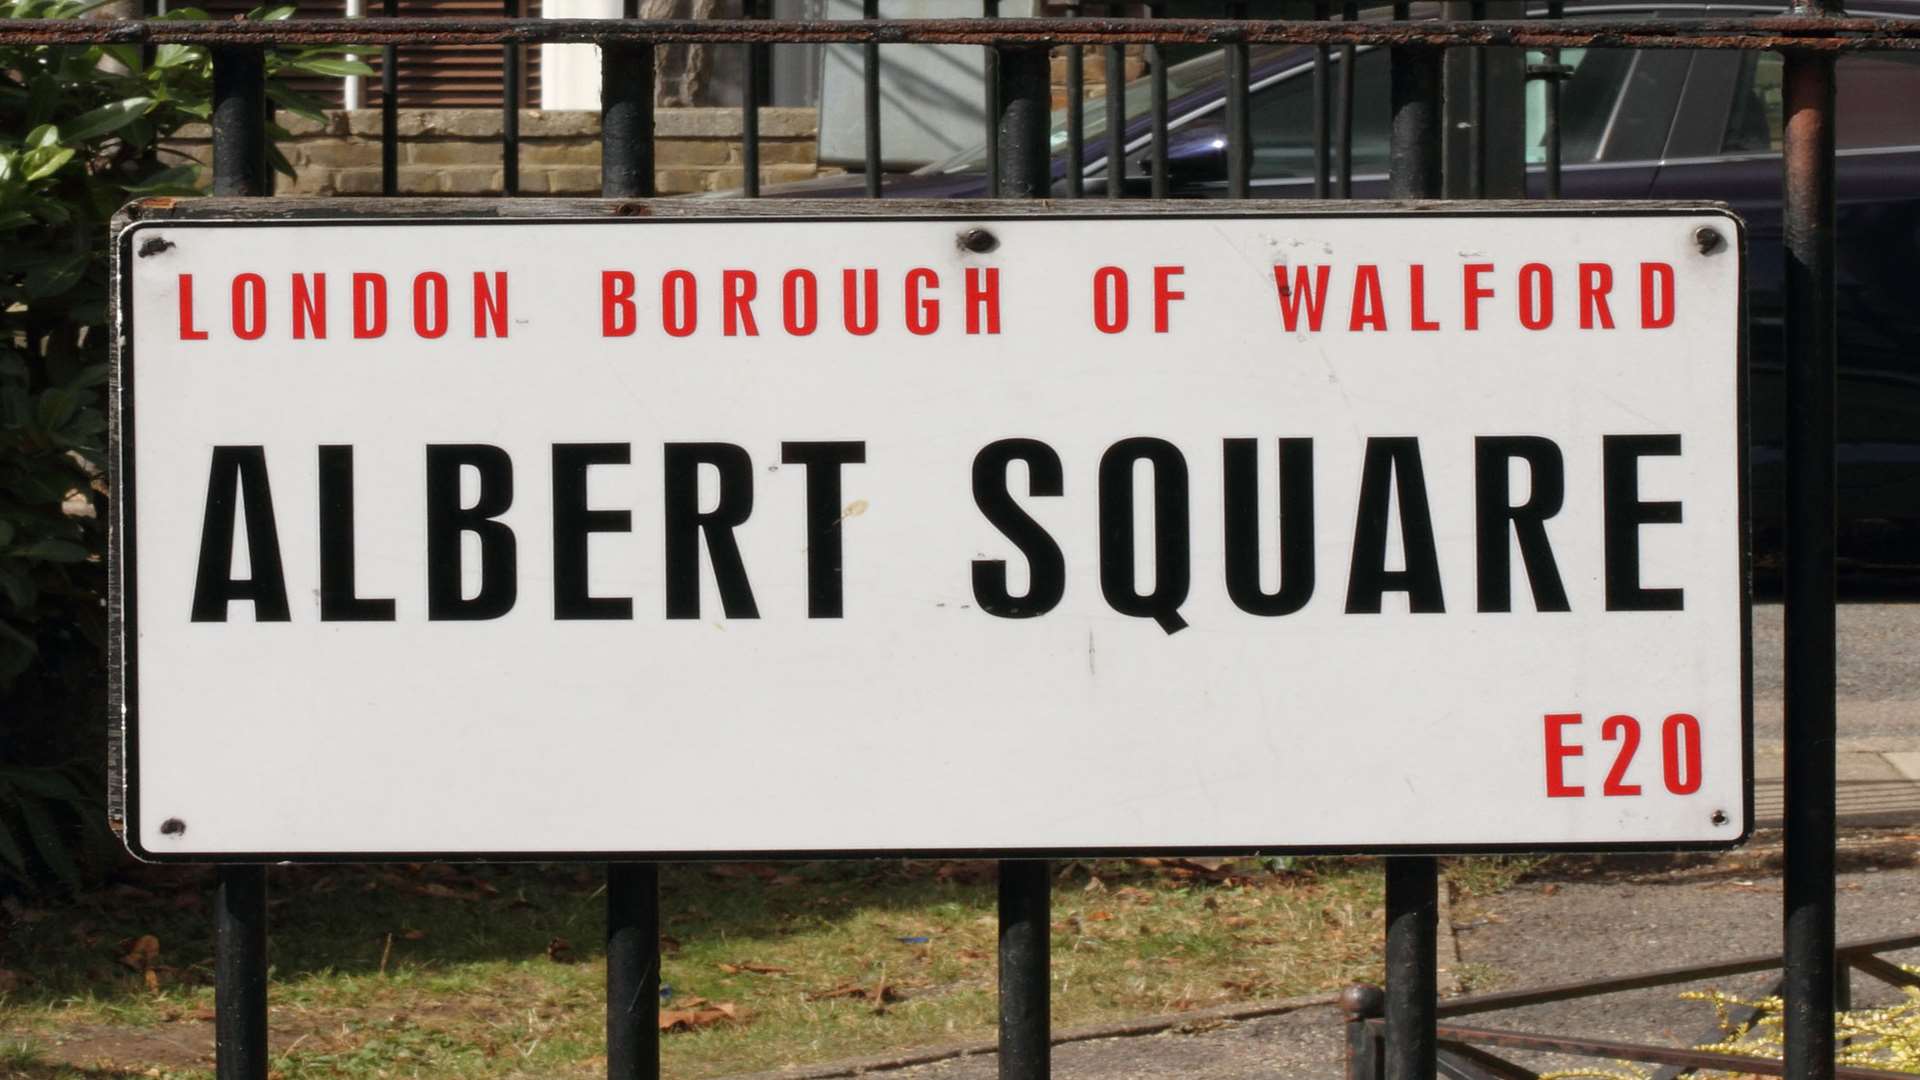 EastEnders will be screened in Whitstable for a special event